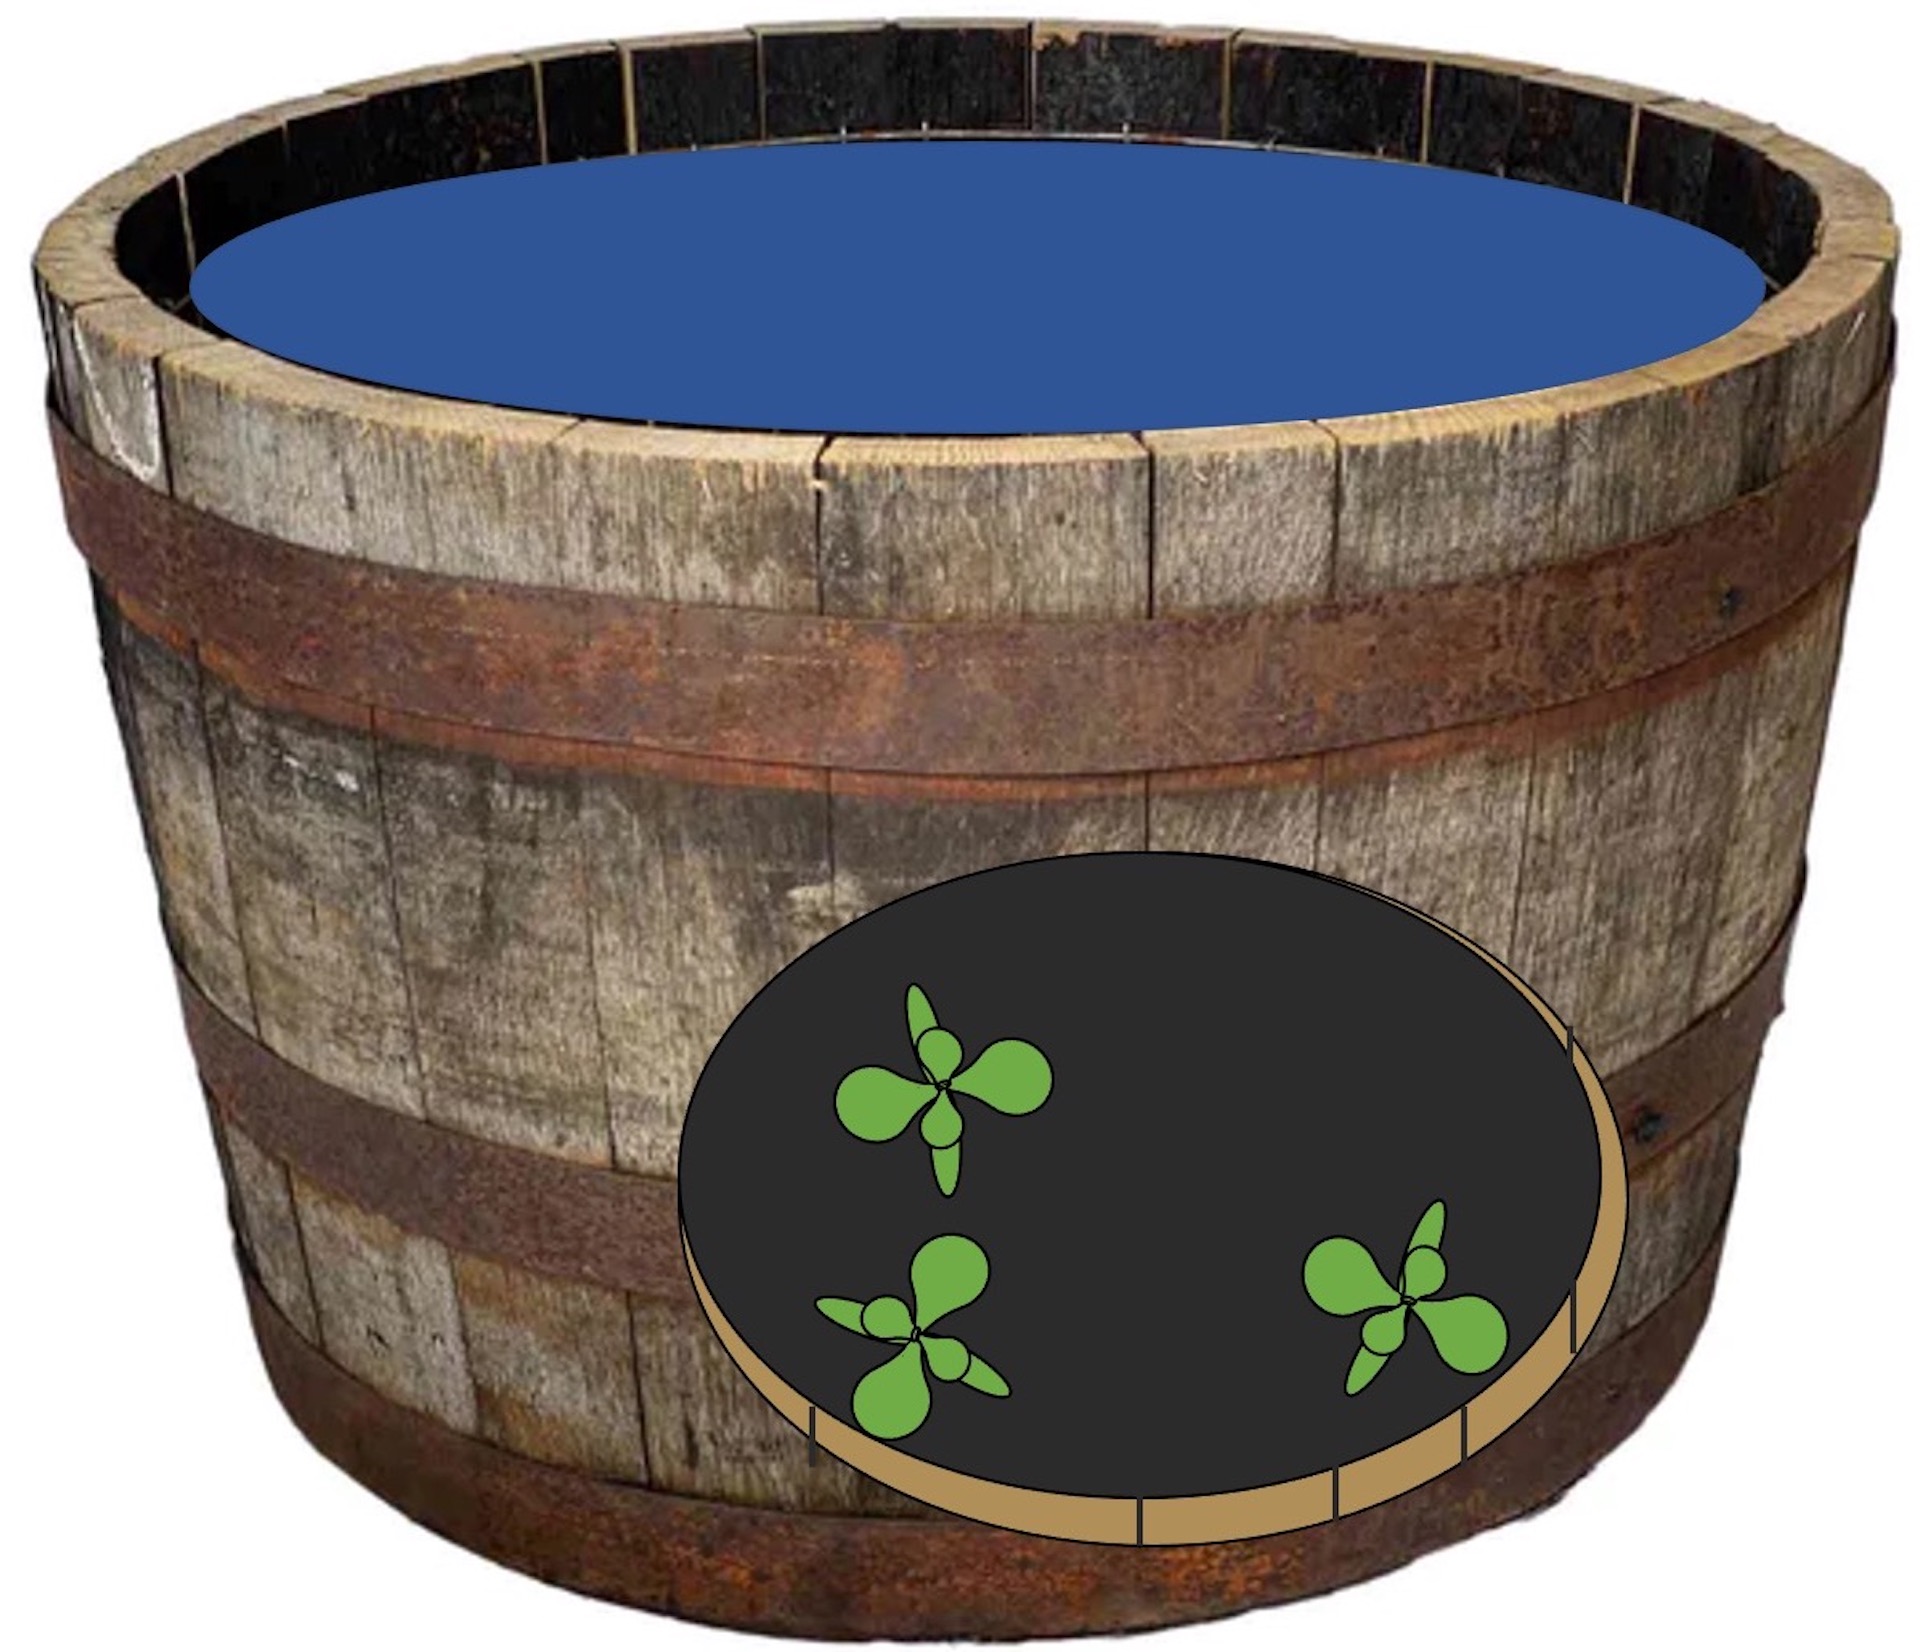 Half whiskey-barrel water garden with window showing seedlings sprouting at the bottom.